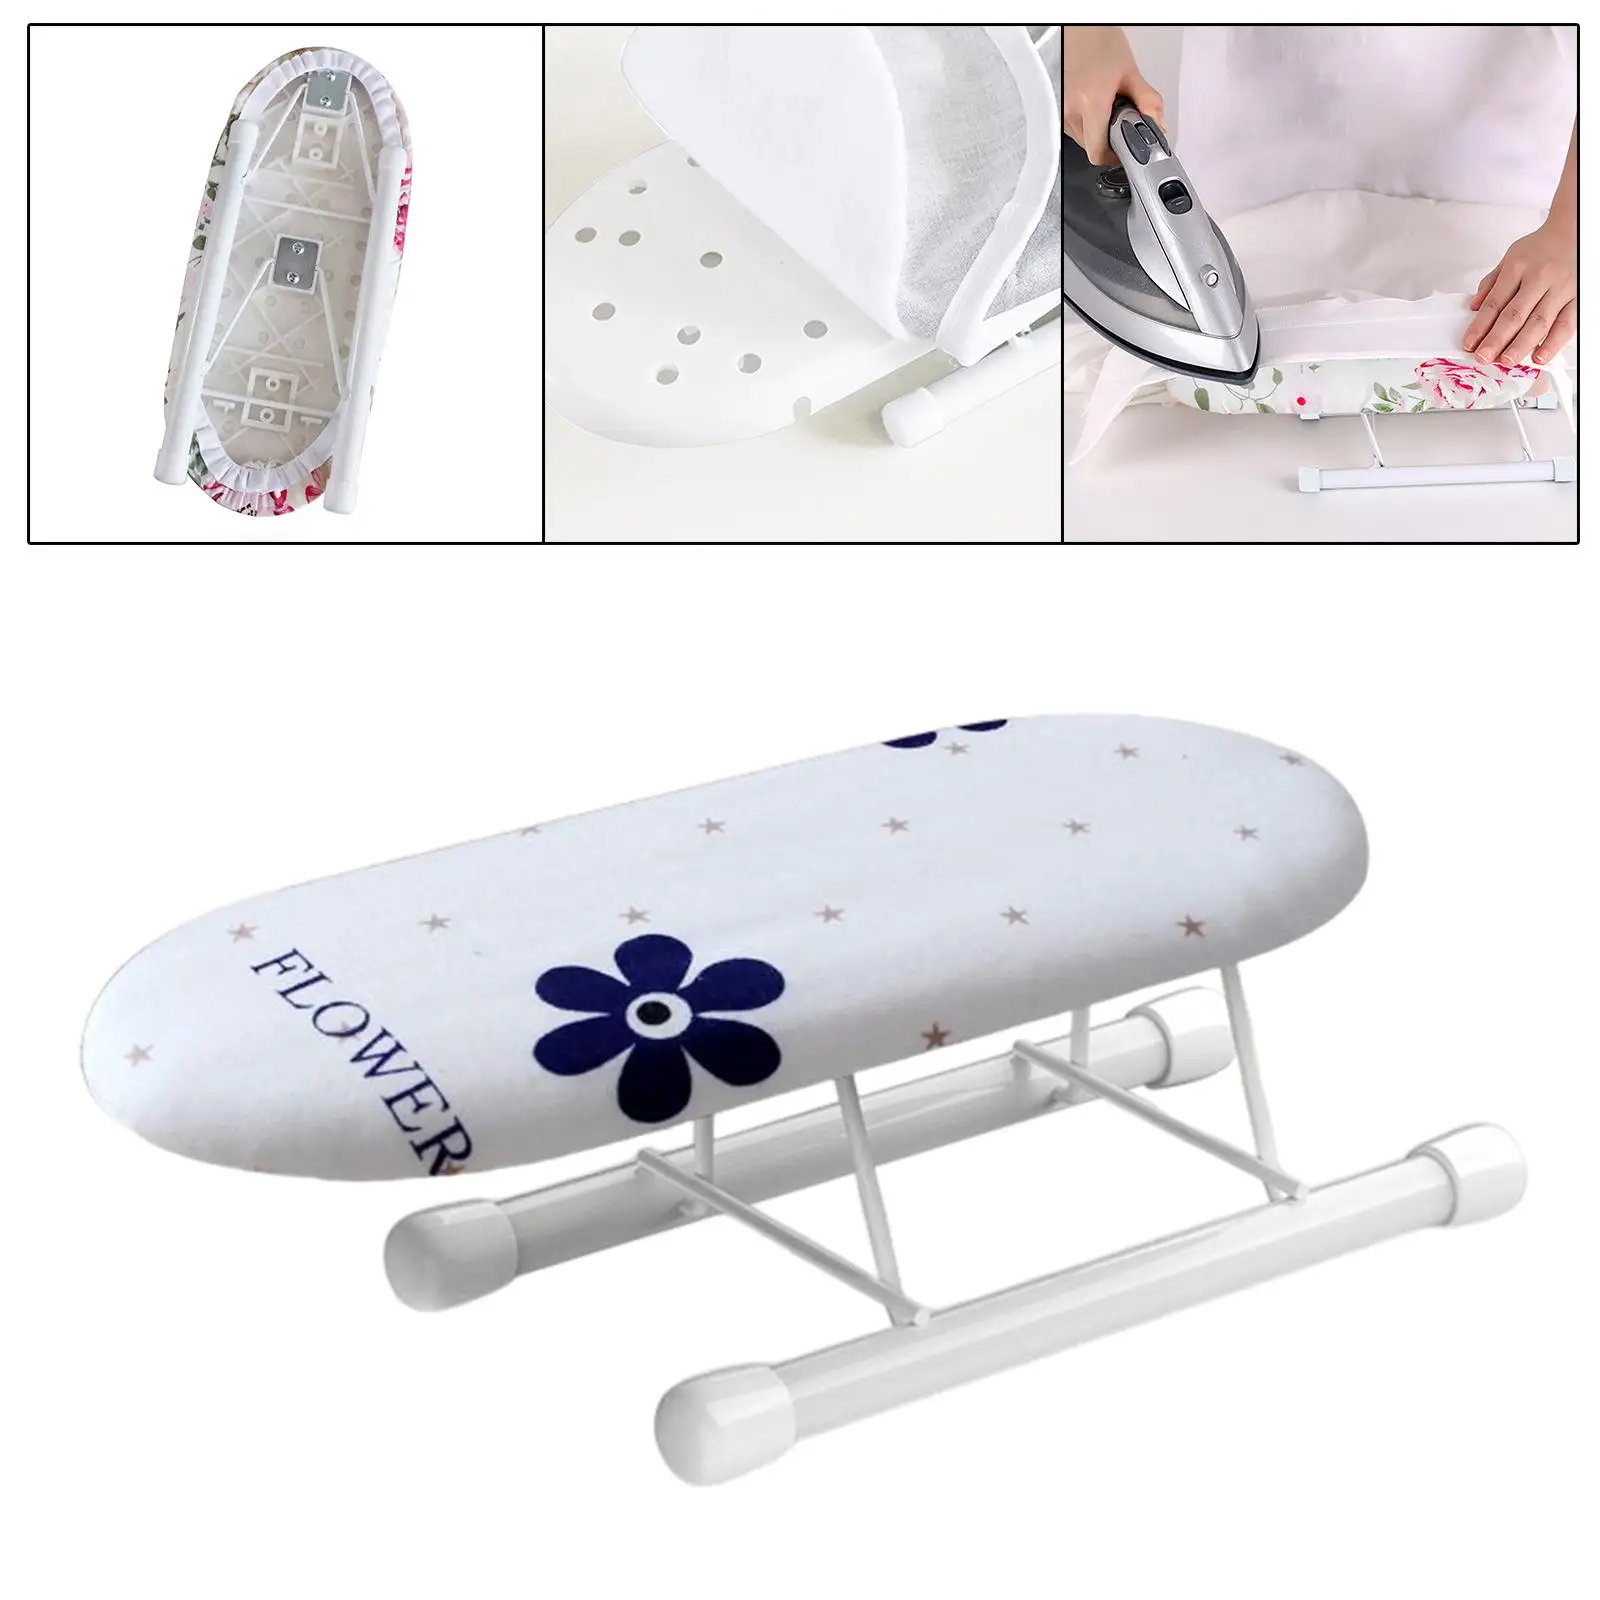 Portable Ironing Board with Folding Legs Folding Ironing Accessories for Countertop Household Dorms Craft Room Ironing Clothes